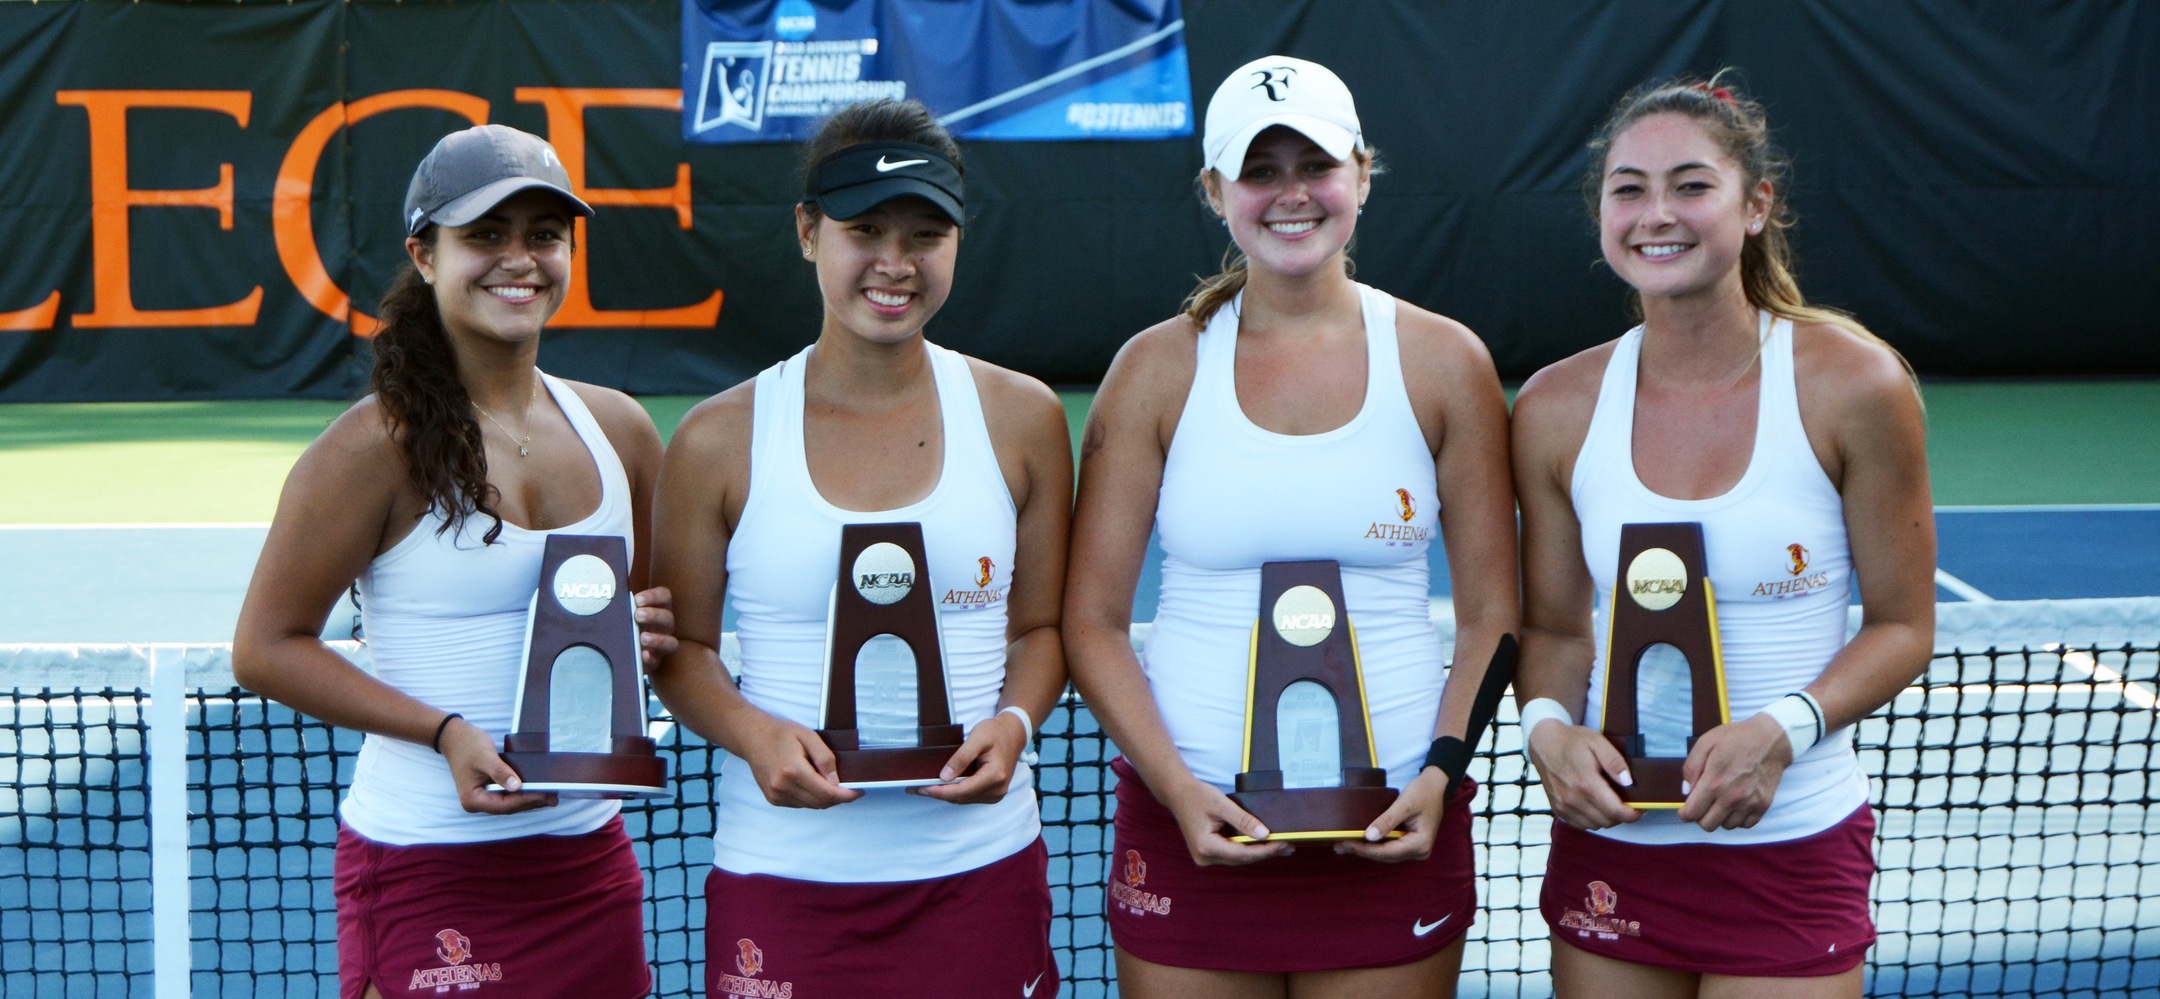 From L to R: Sarah Bahsoun, Nicole Tan, Caroline Cox and Catherine Allen after facing each other in the NCAA Doubles Finals